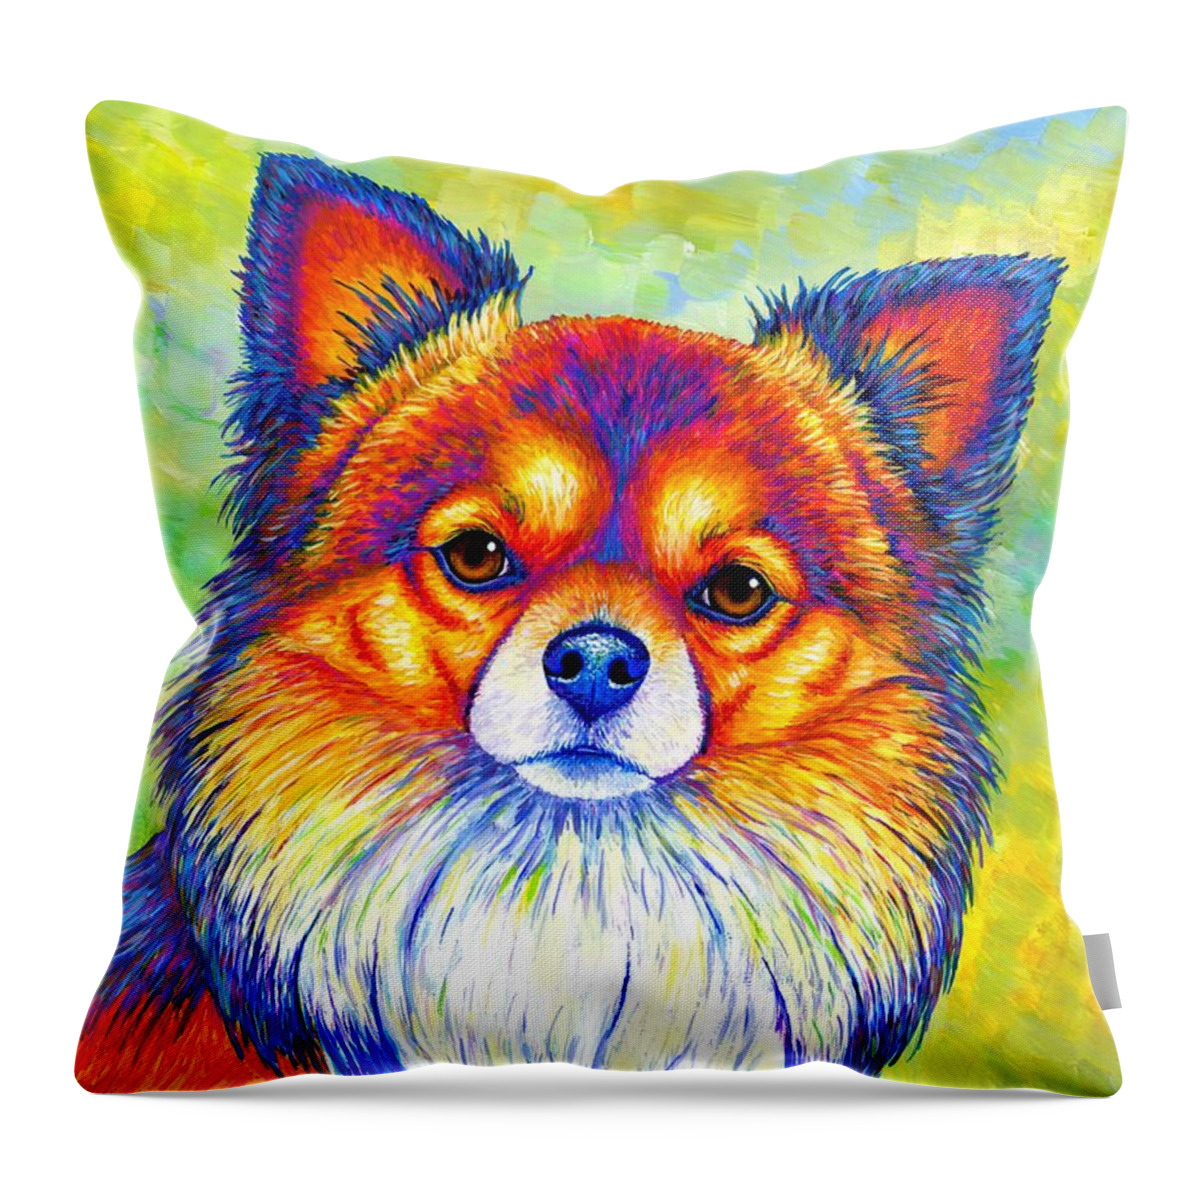 Chihuahua Throw Pillow featuring the painting Small and Sassy - Colorful Rainbow Chihuahua Dog by Rebecca Wang